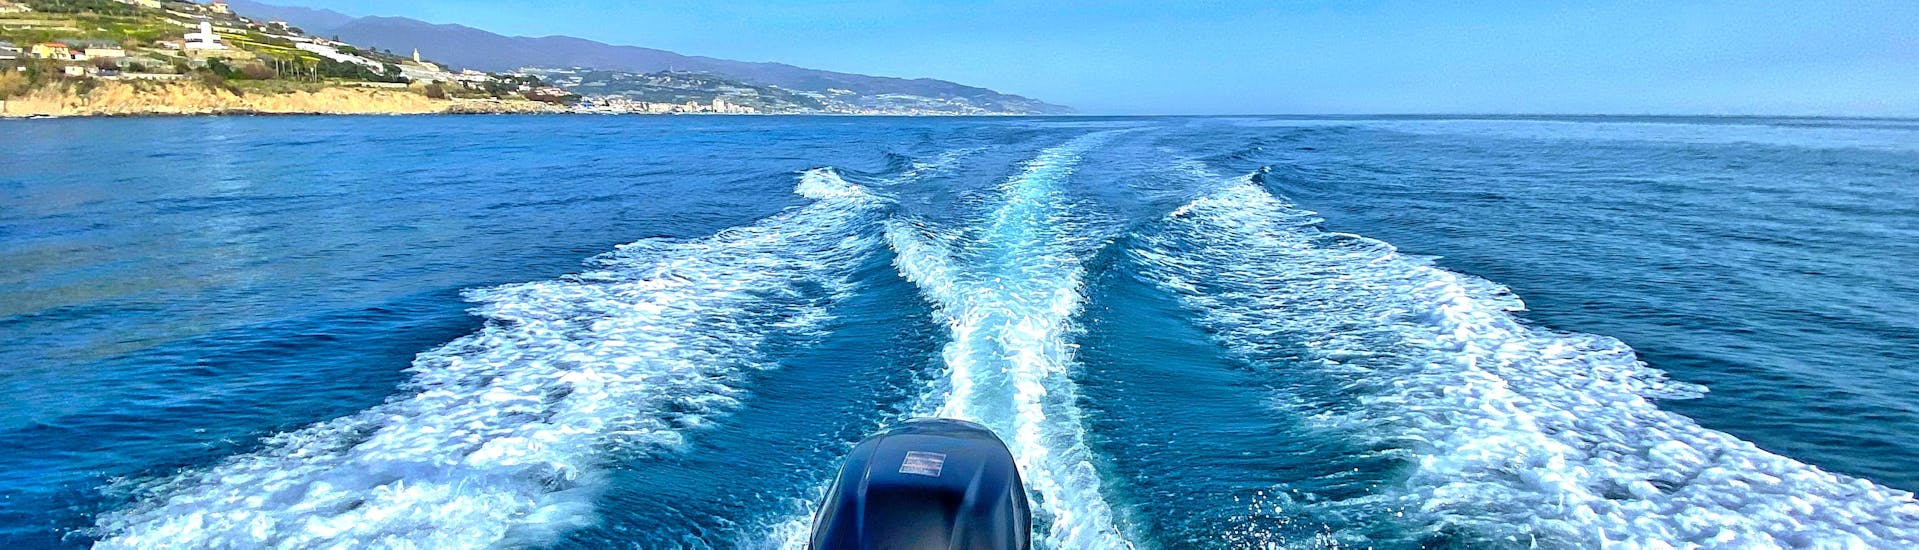 Private Boat Trip from Sanremo with Swimming Stops and Apéritif.